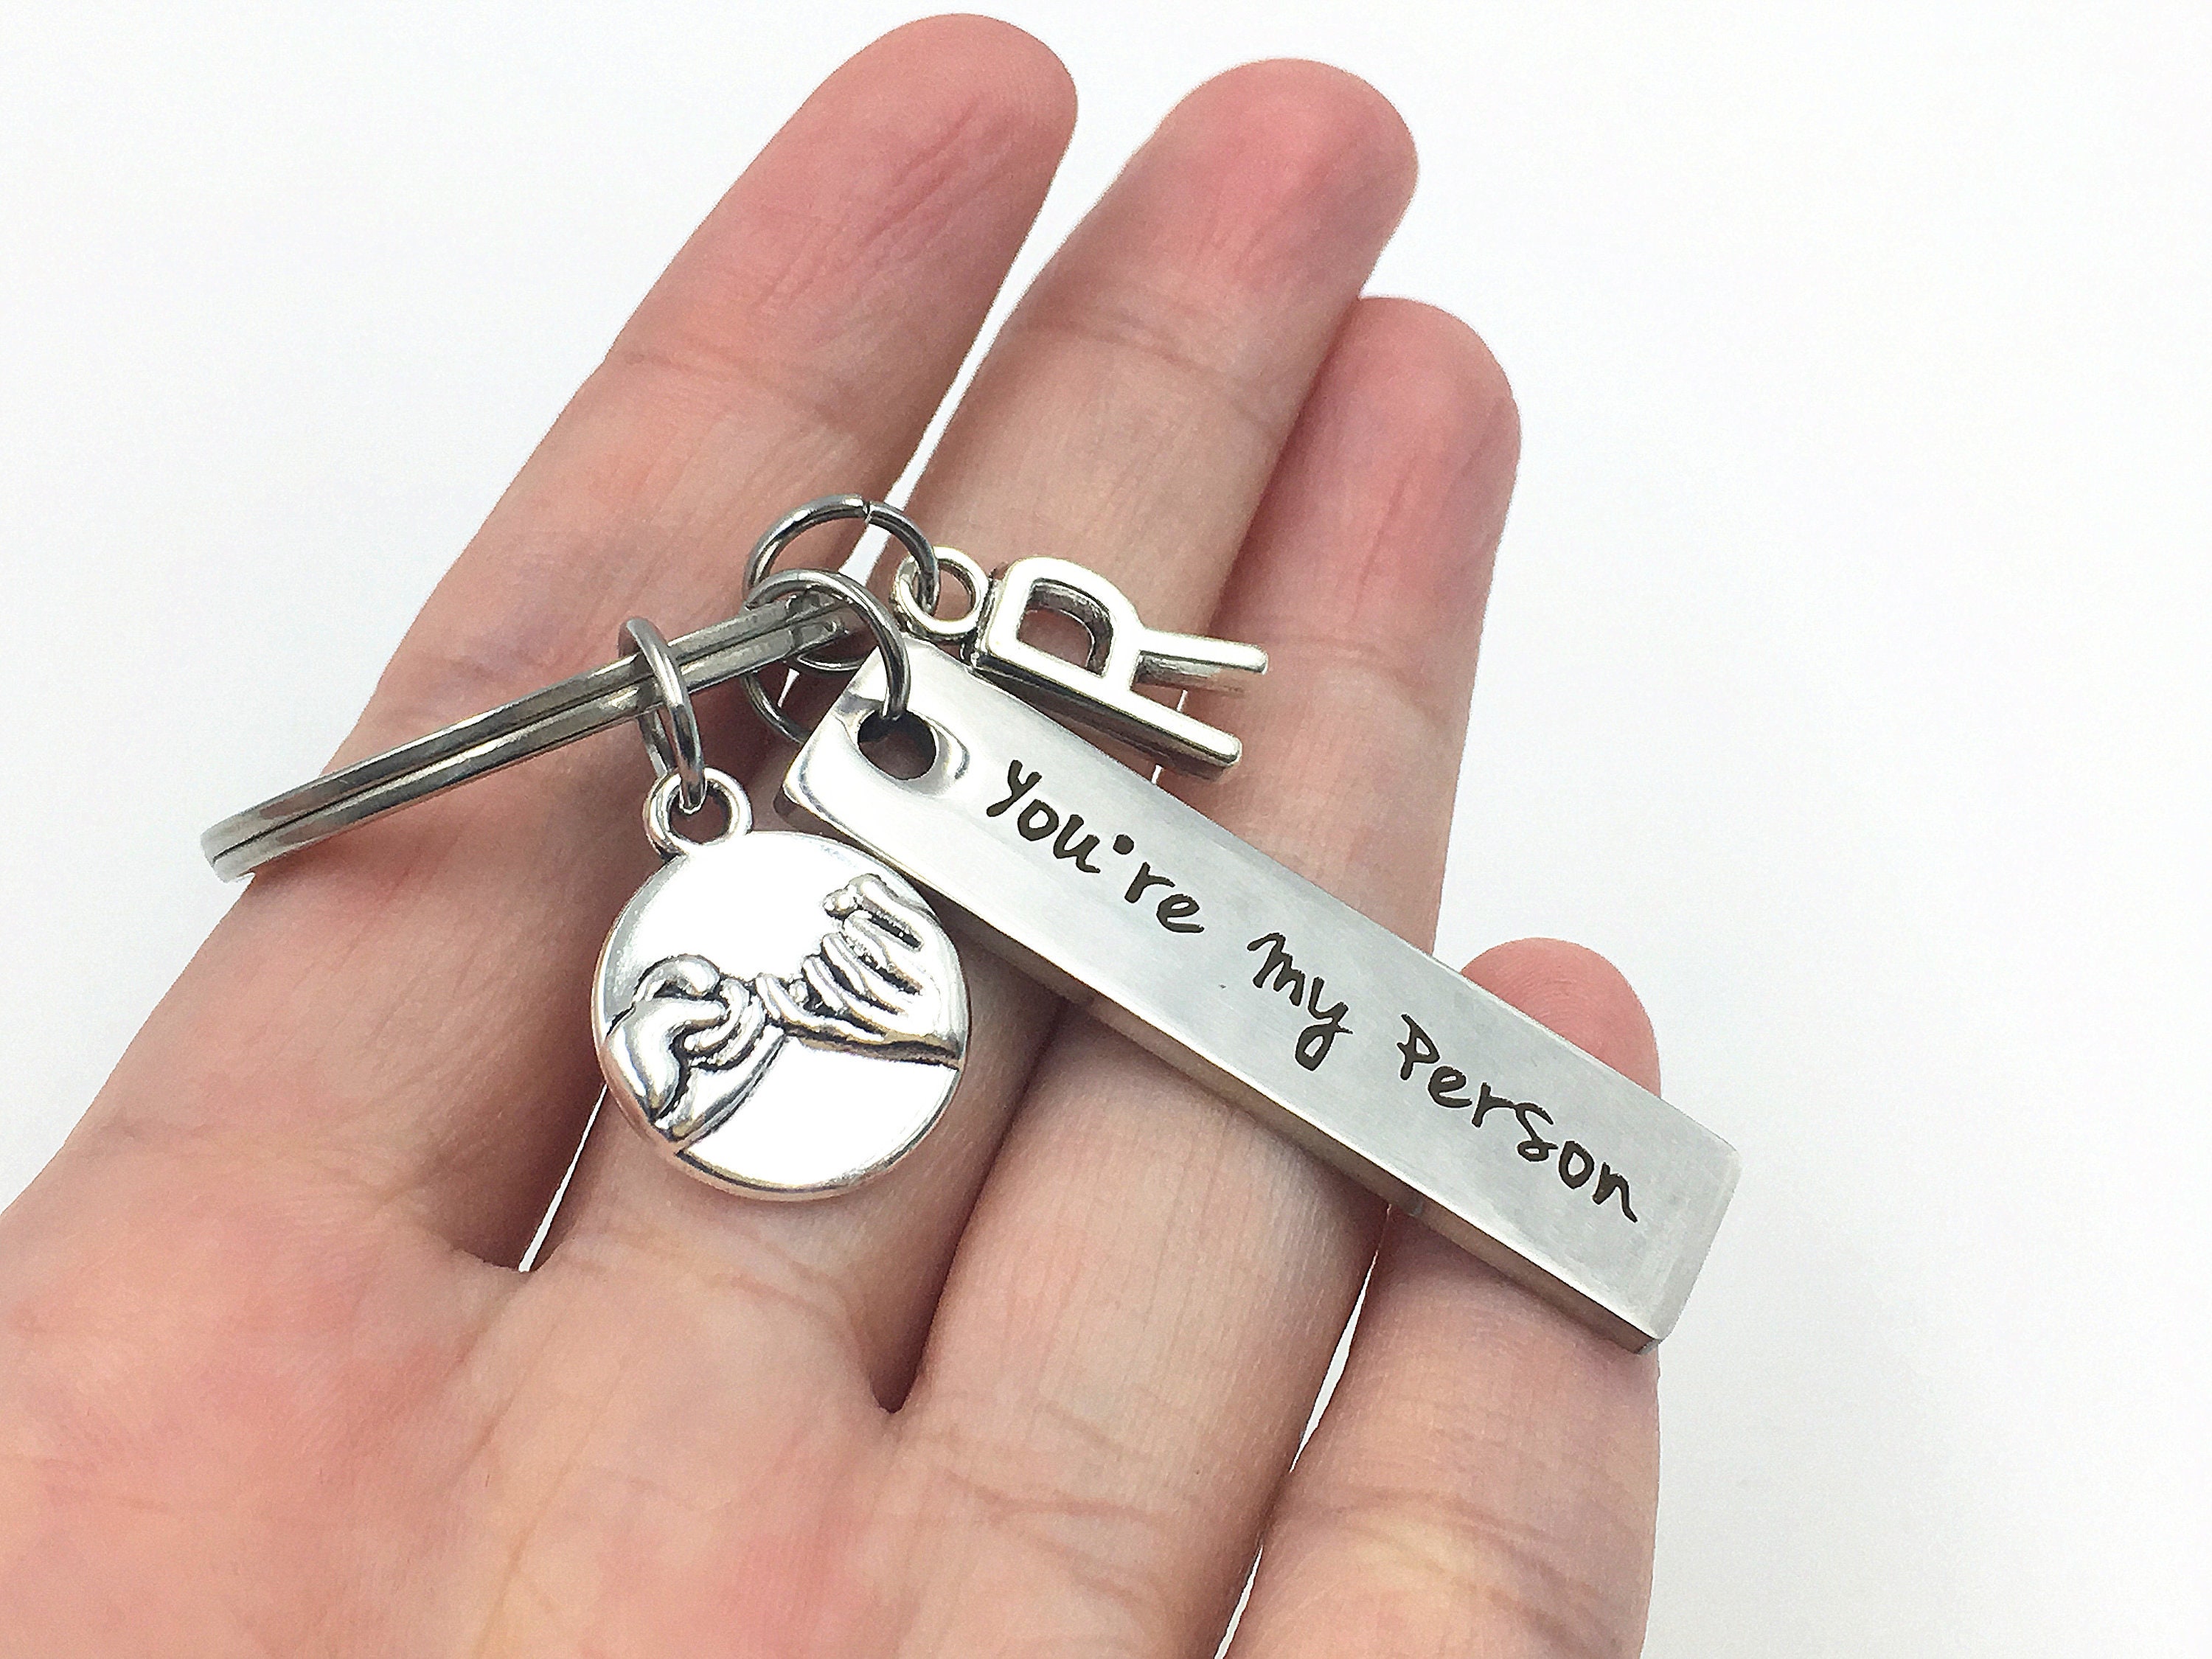 Cool Key Chain Boys, Cool Gifts Friends, Key Chains Anatomy